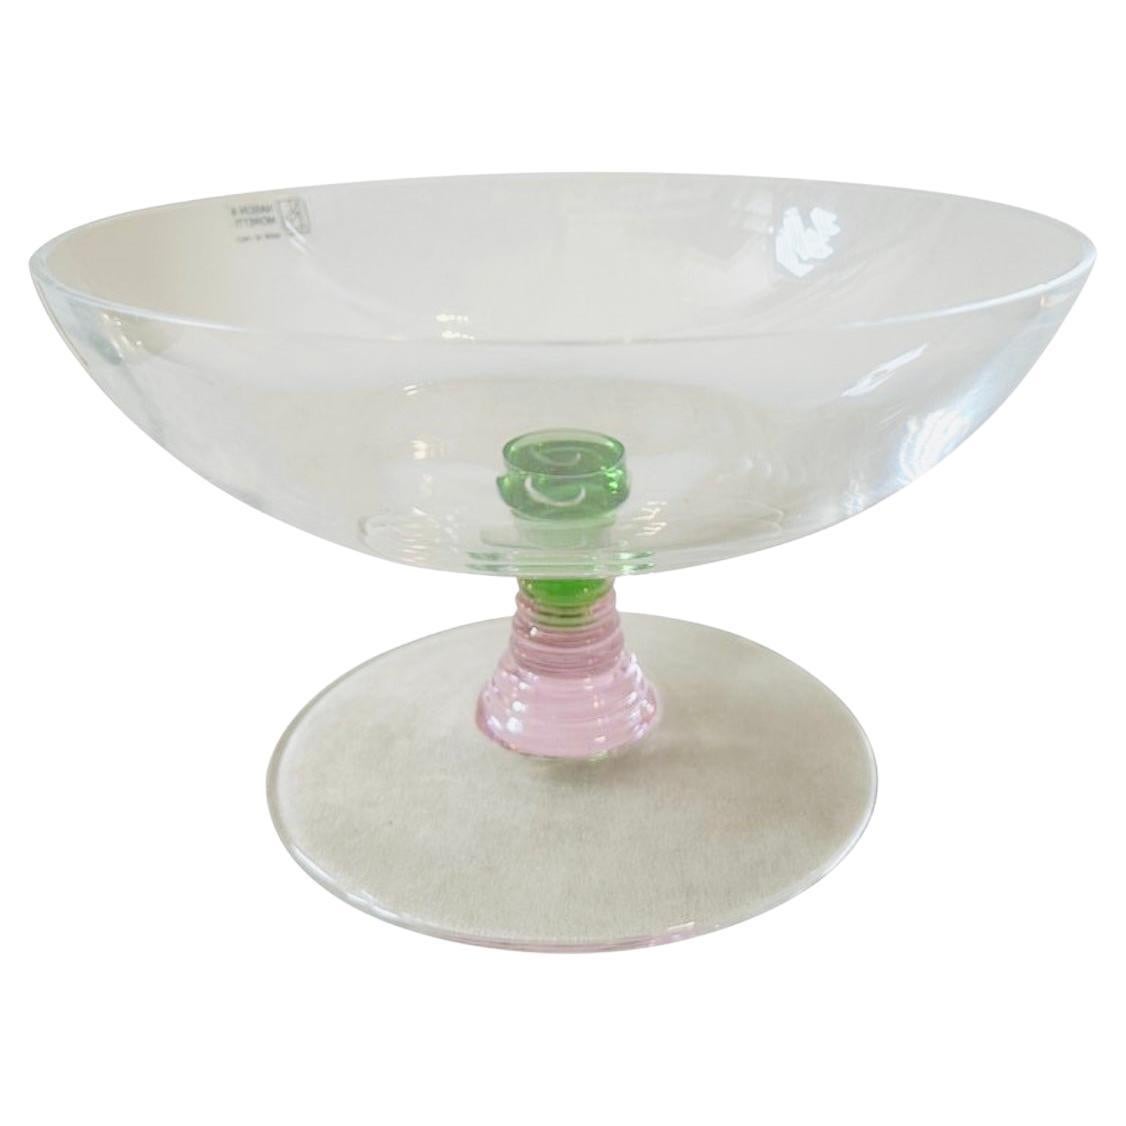 1980s Modern Pink, Green and Clear Murano Glass Bowl By Nason & Moretti